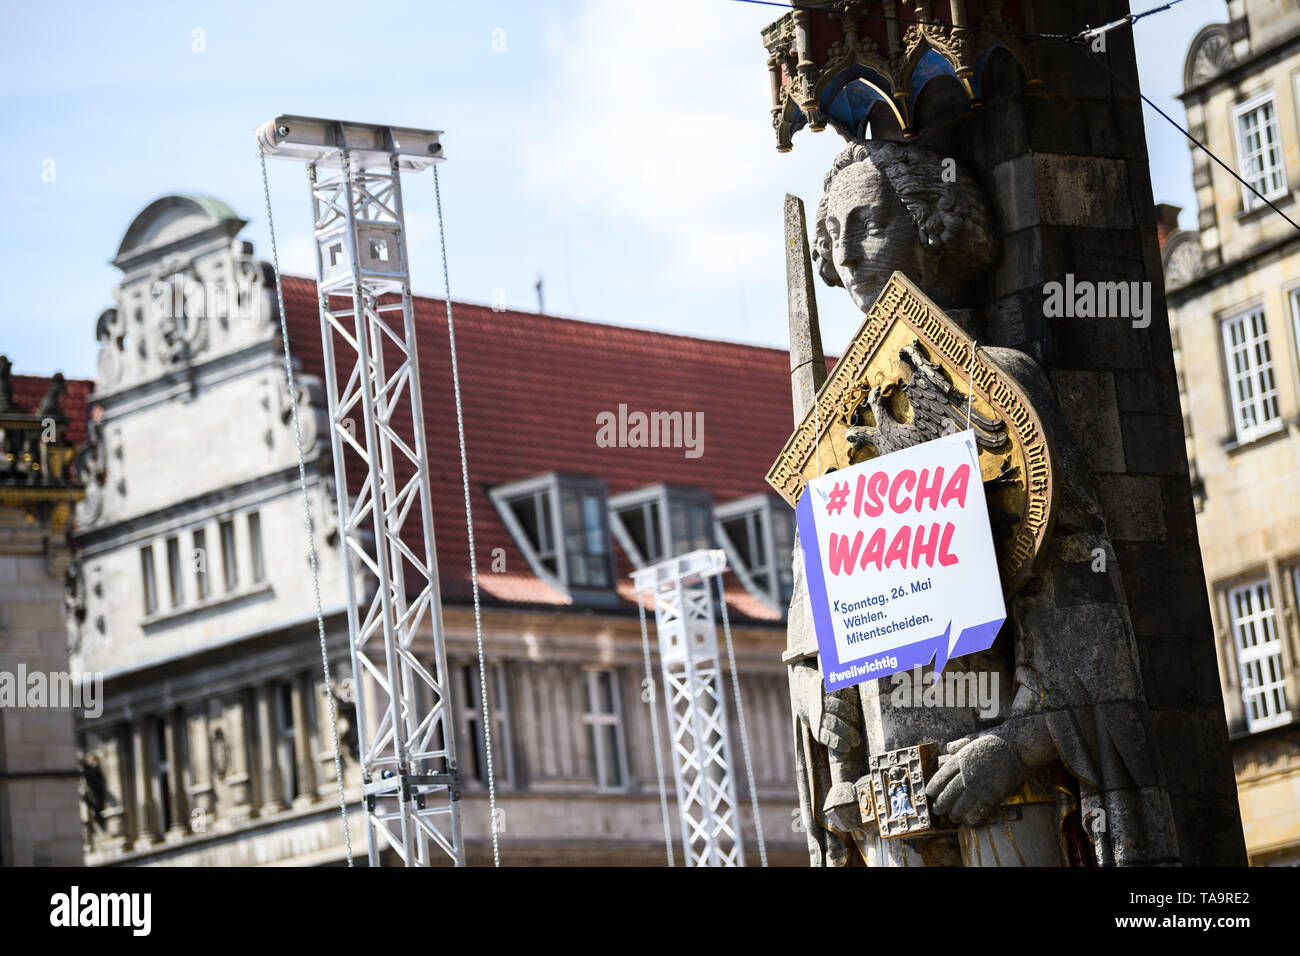 23 May 2019, Bremen: A few days before the Bremen elections, a sign with the inscription '#ISCHA WAAHL - Sonntag 26. Mai Wählen' (#ISCHA WAAHL - Vote Sunday 26. May) hangs on Roland. Co-decide.' . On 26 May, the citizens' elections will take place in Bremen. Photo: Mohssen Assanimoghaddam/dpa Stock Photo